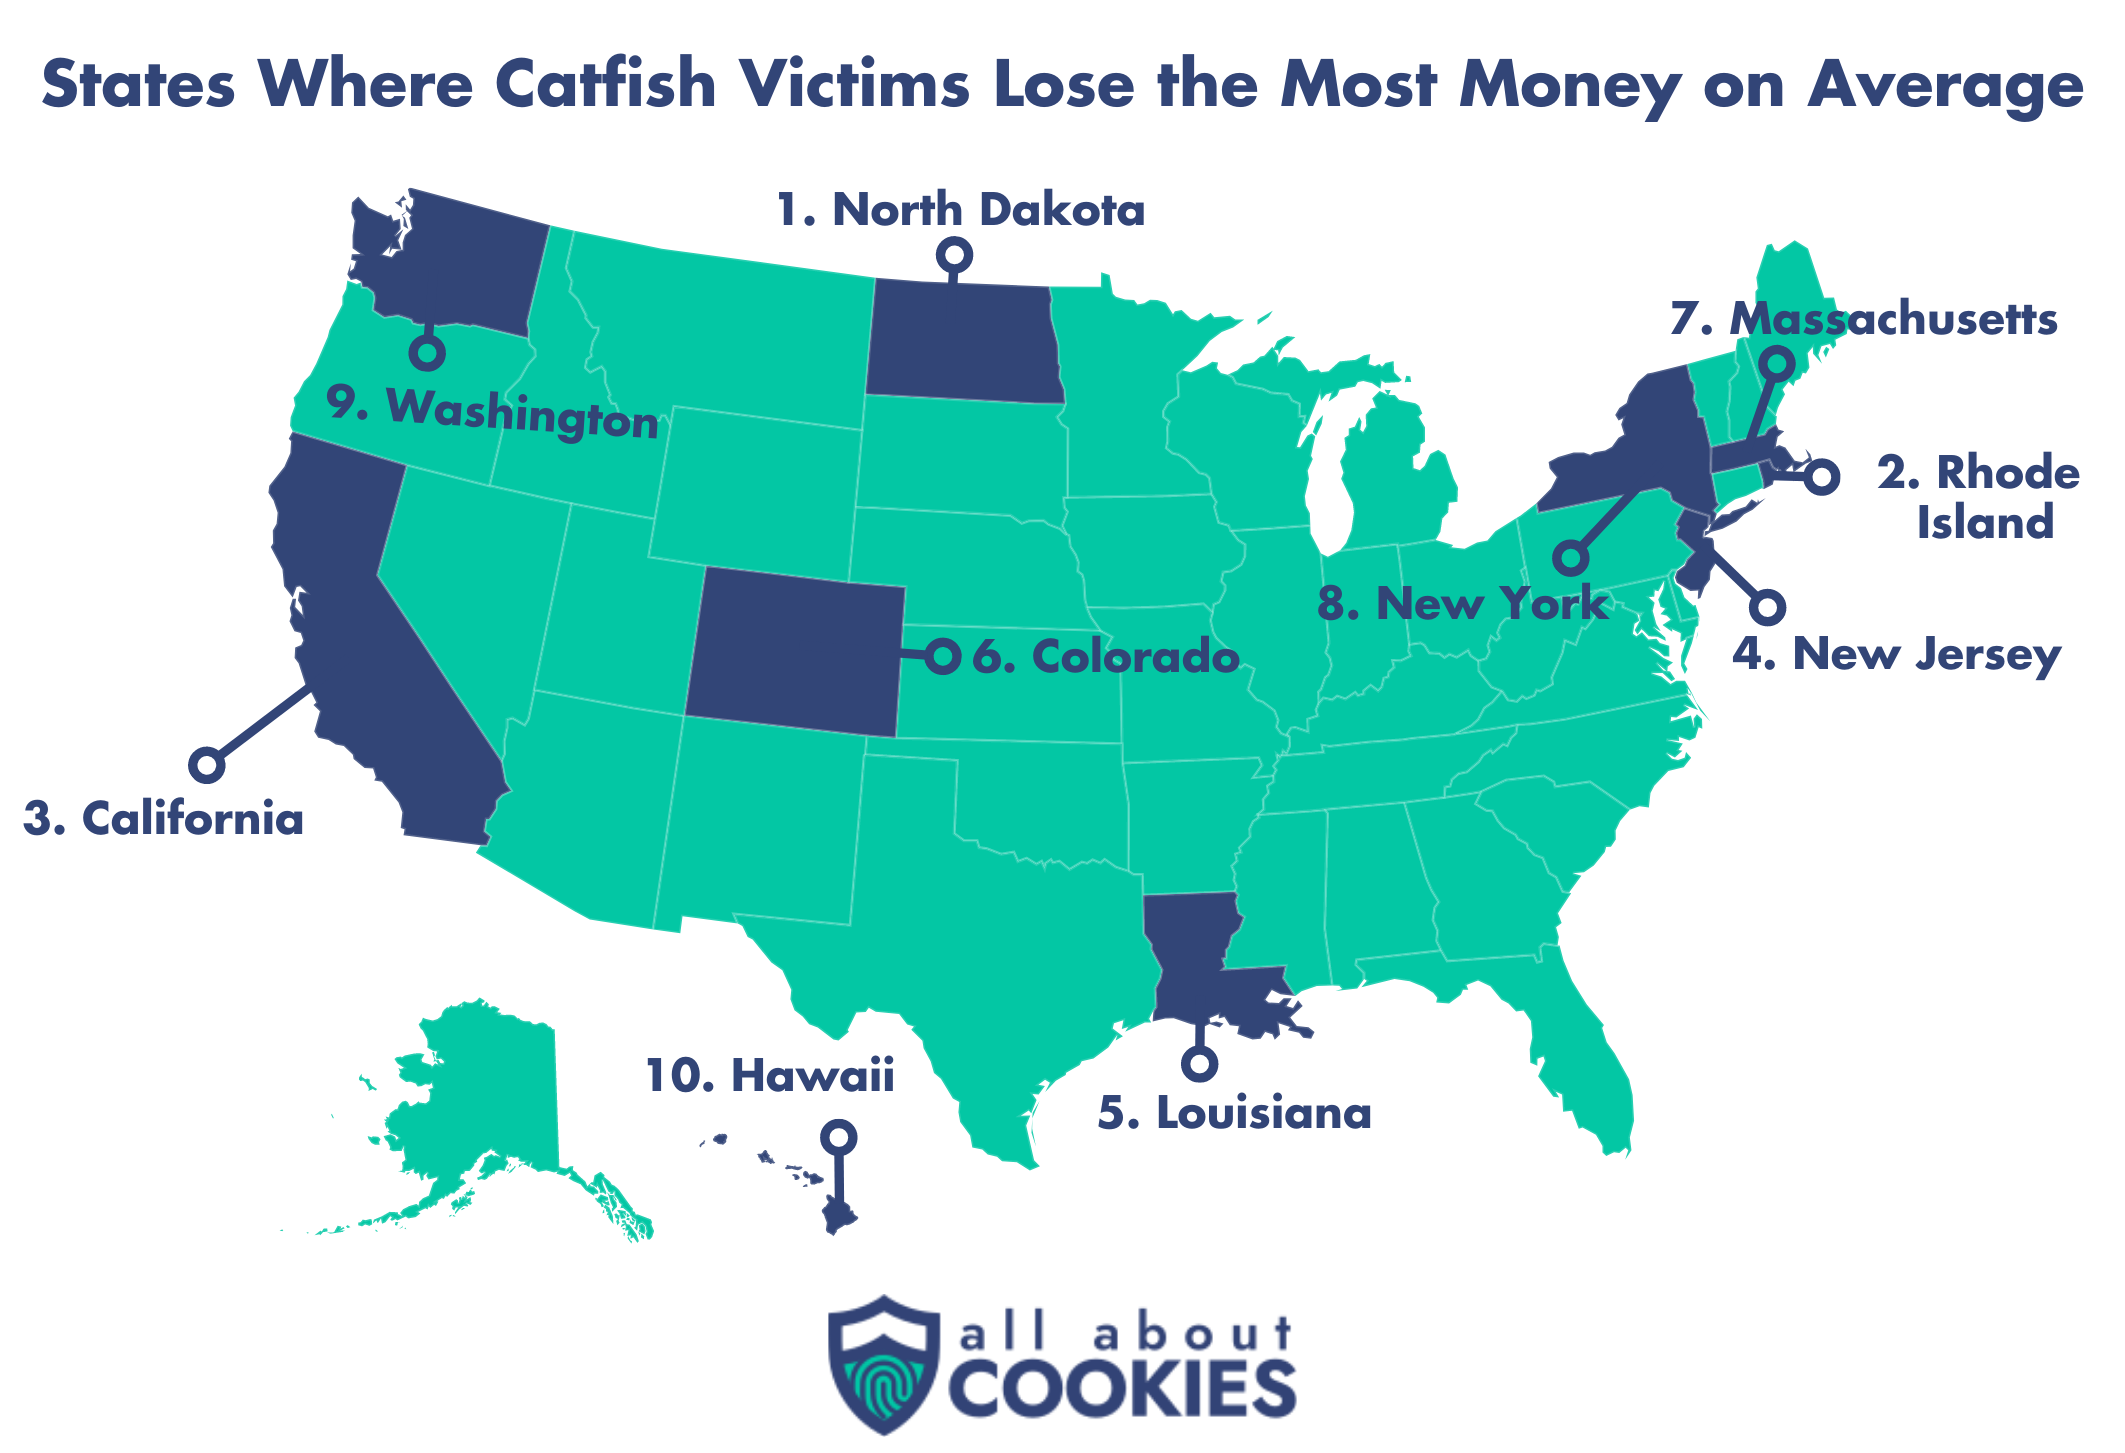 When it comes to the most money lost per victim, North Dakota, Rhode Island, and California residents reported the largest losses.